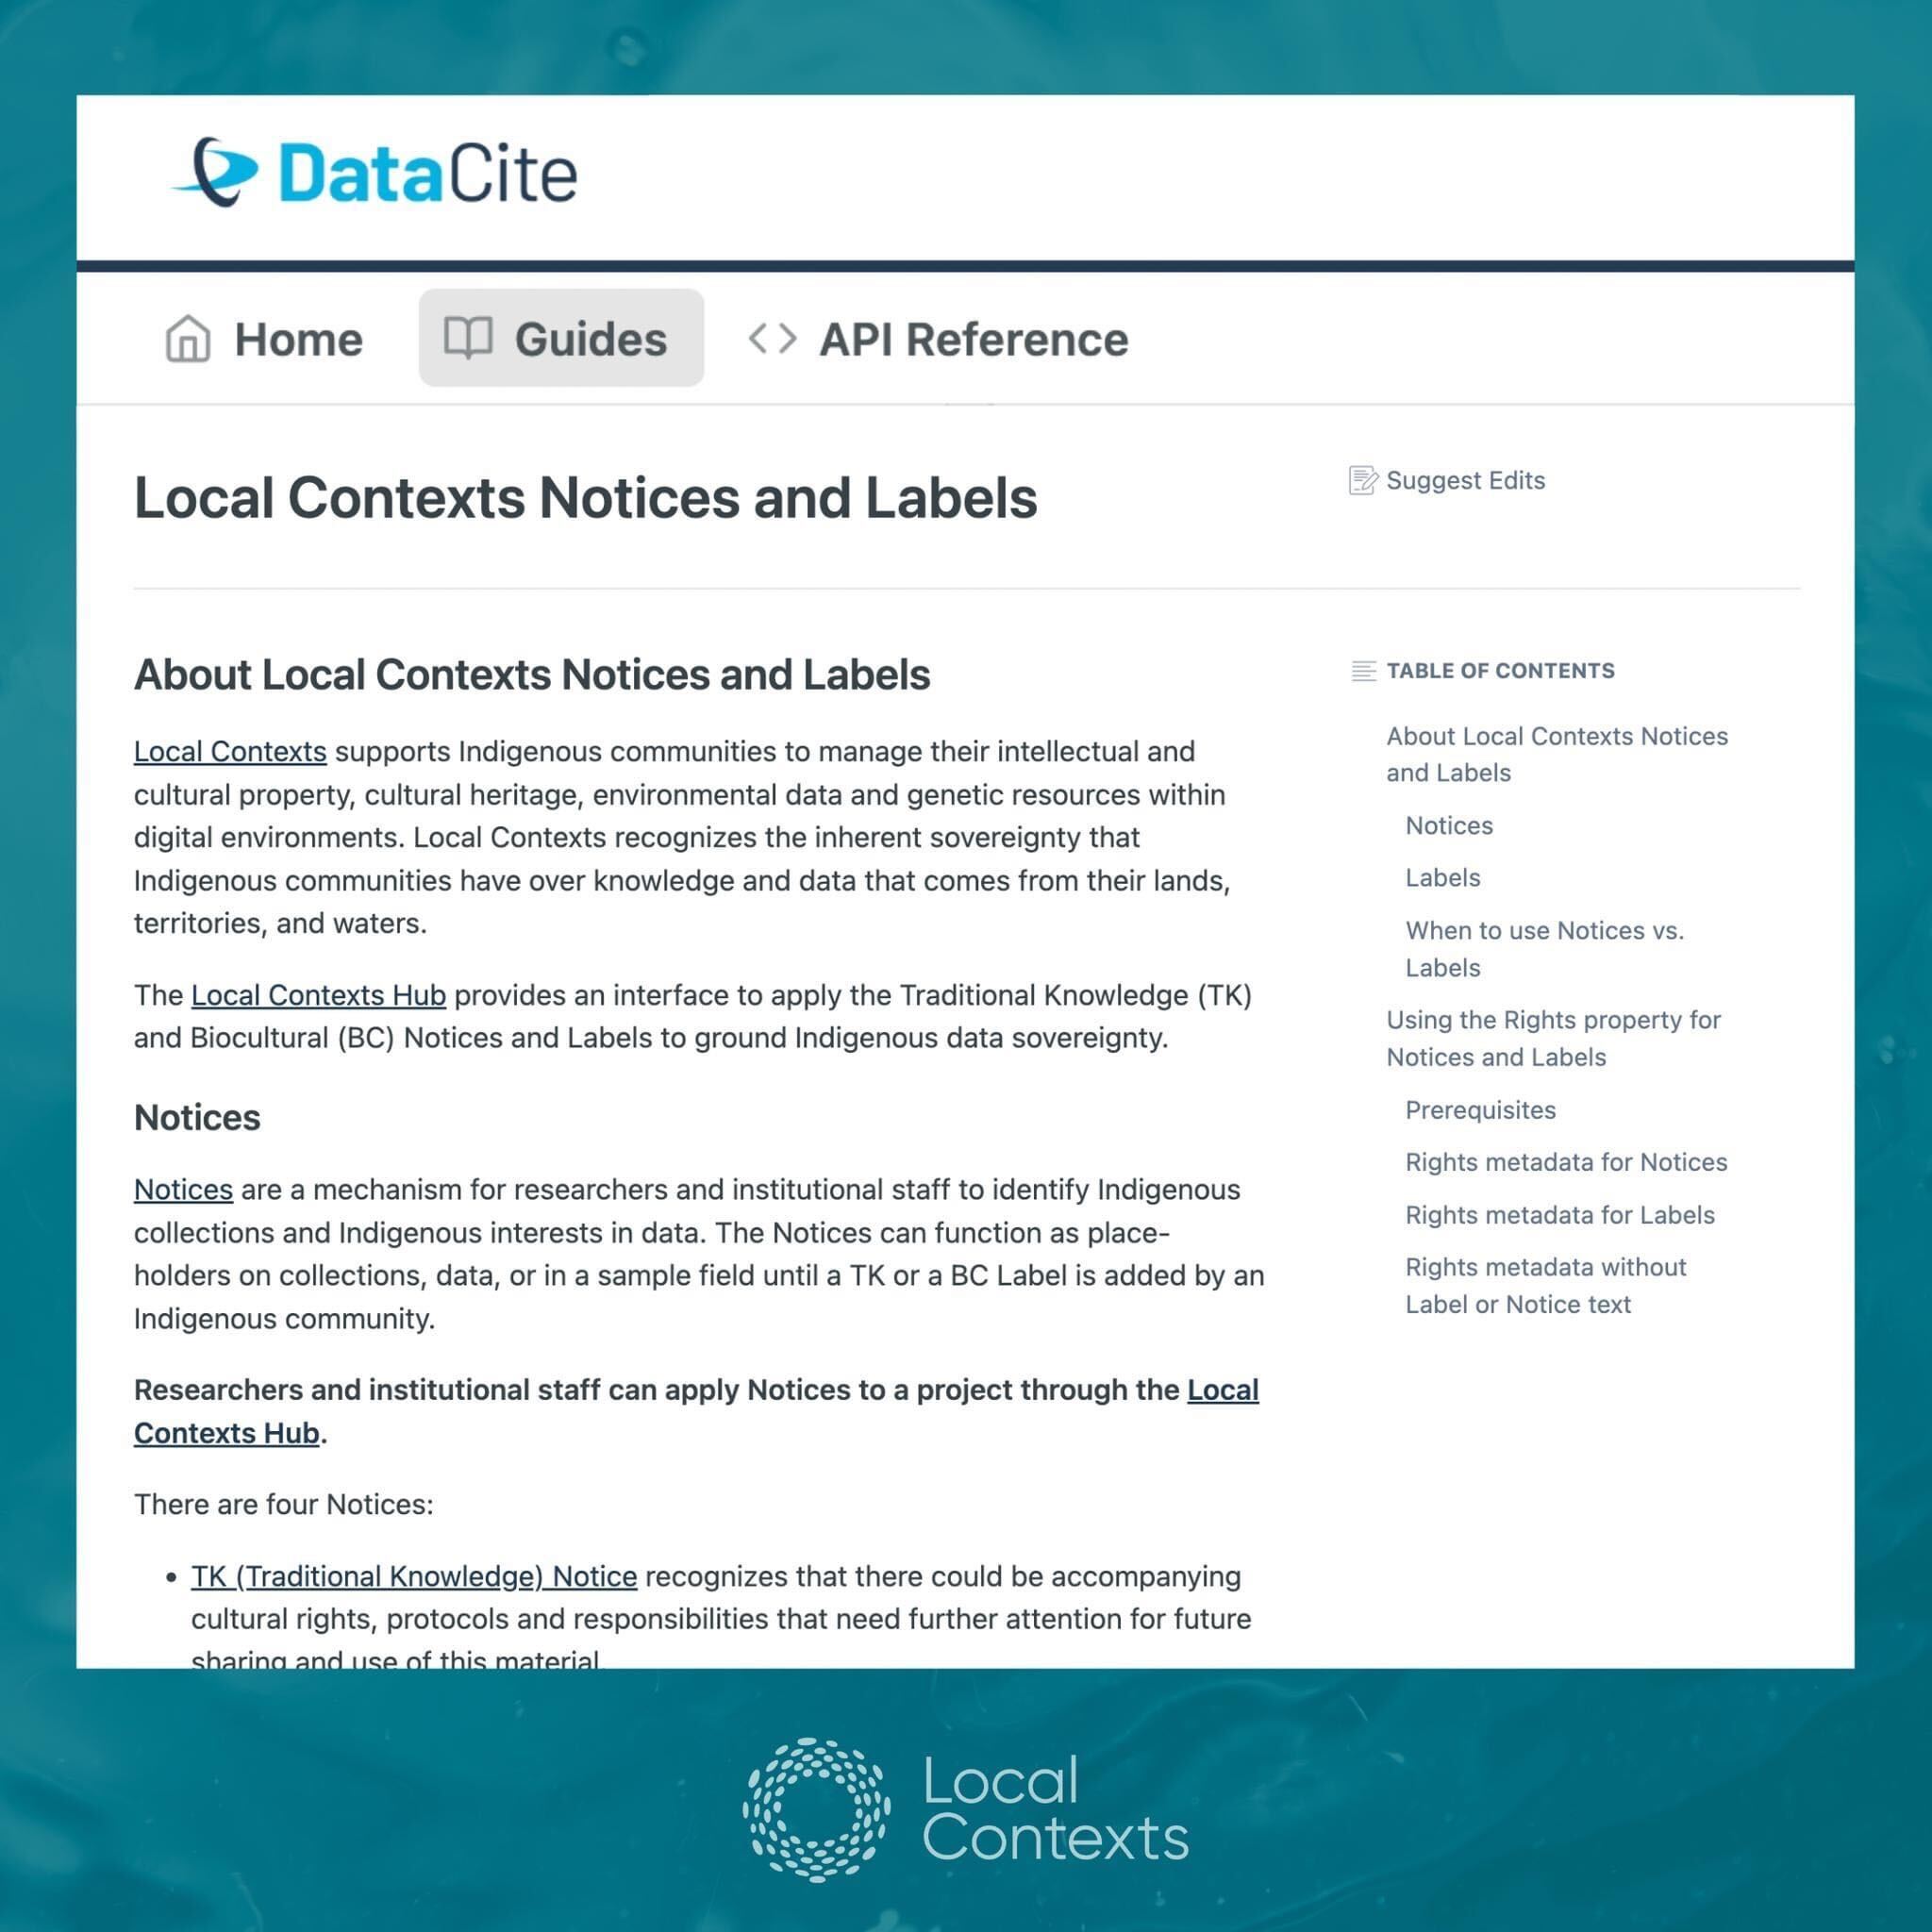 On a decorative blue background, a screenshot of the DataCite Support website titled “Local Contexts Notices and Labels.” At the bottom, the Local Contexts logo, a ring made of dots, in white.